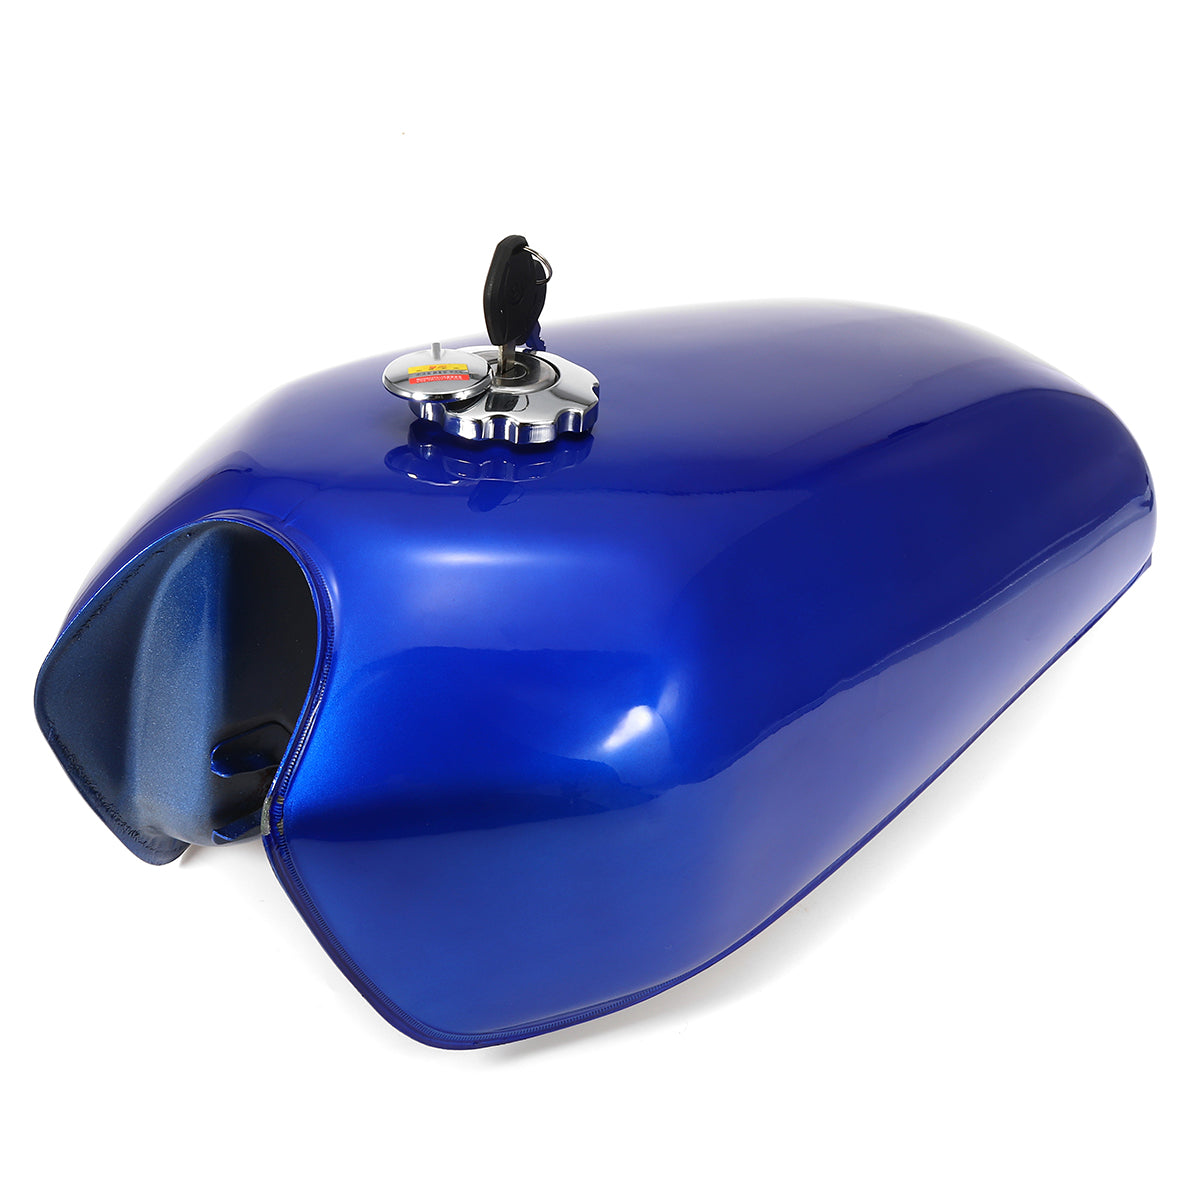 Royal Blue 9L 2.4 Gallon Motorcycle Cafe Racer Fuel Gas Tank with Petrol Cap Key For Honda CG125